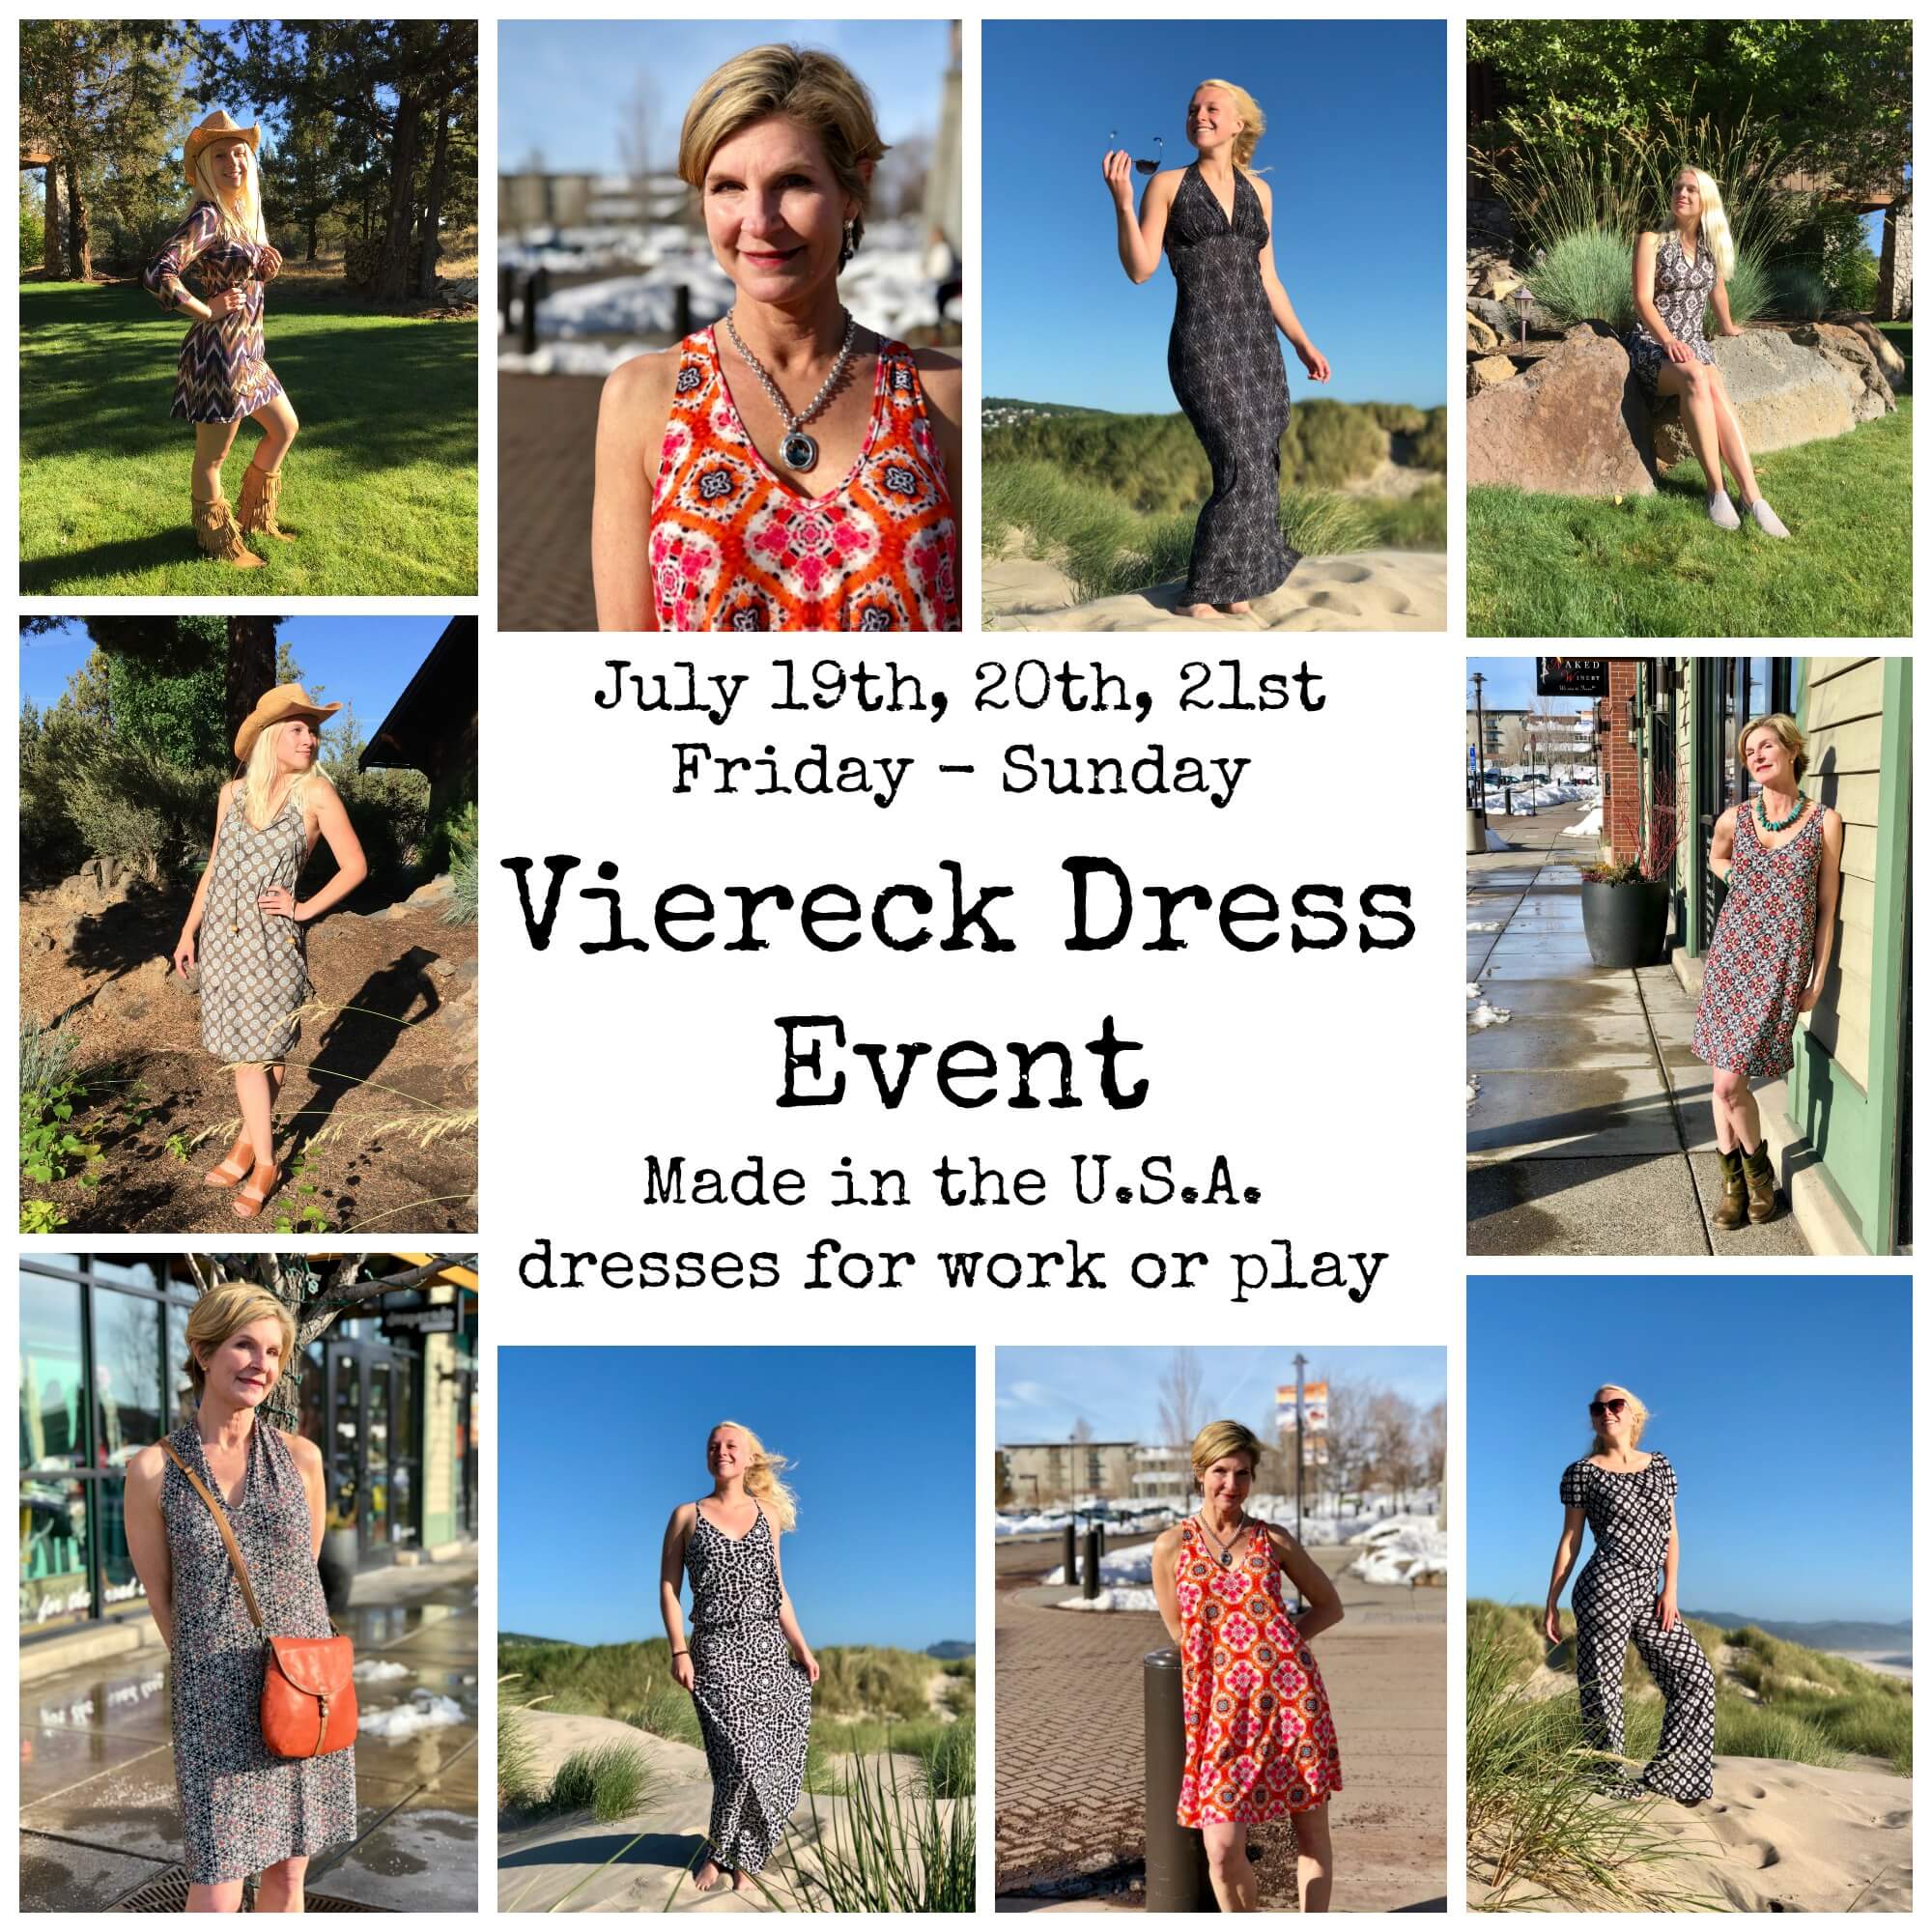 Images of Viereck Dresses and Save the Date note with event happening July 19-21